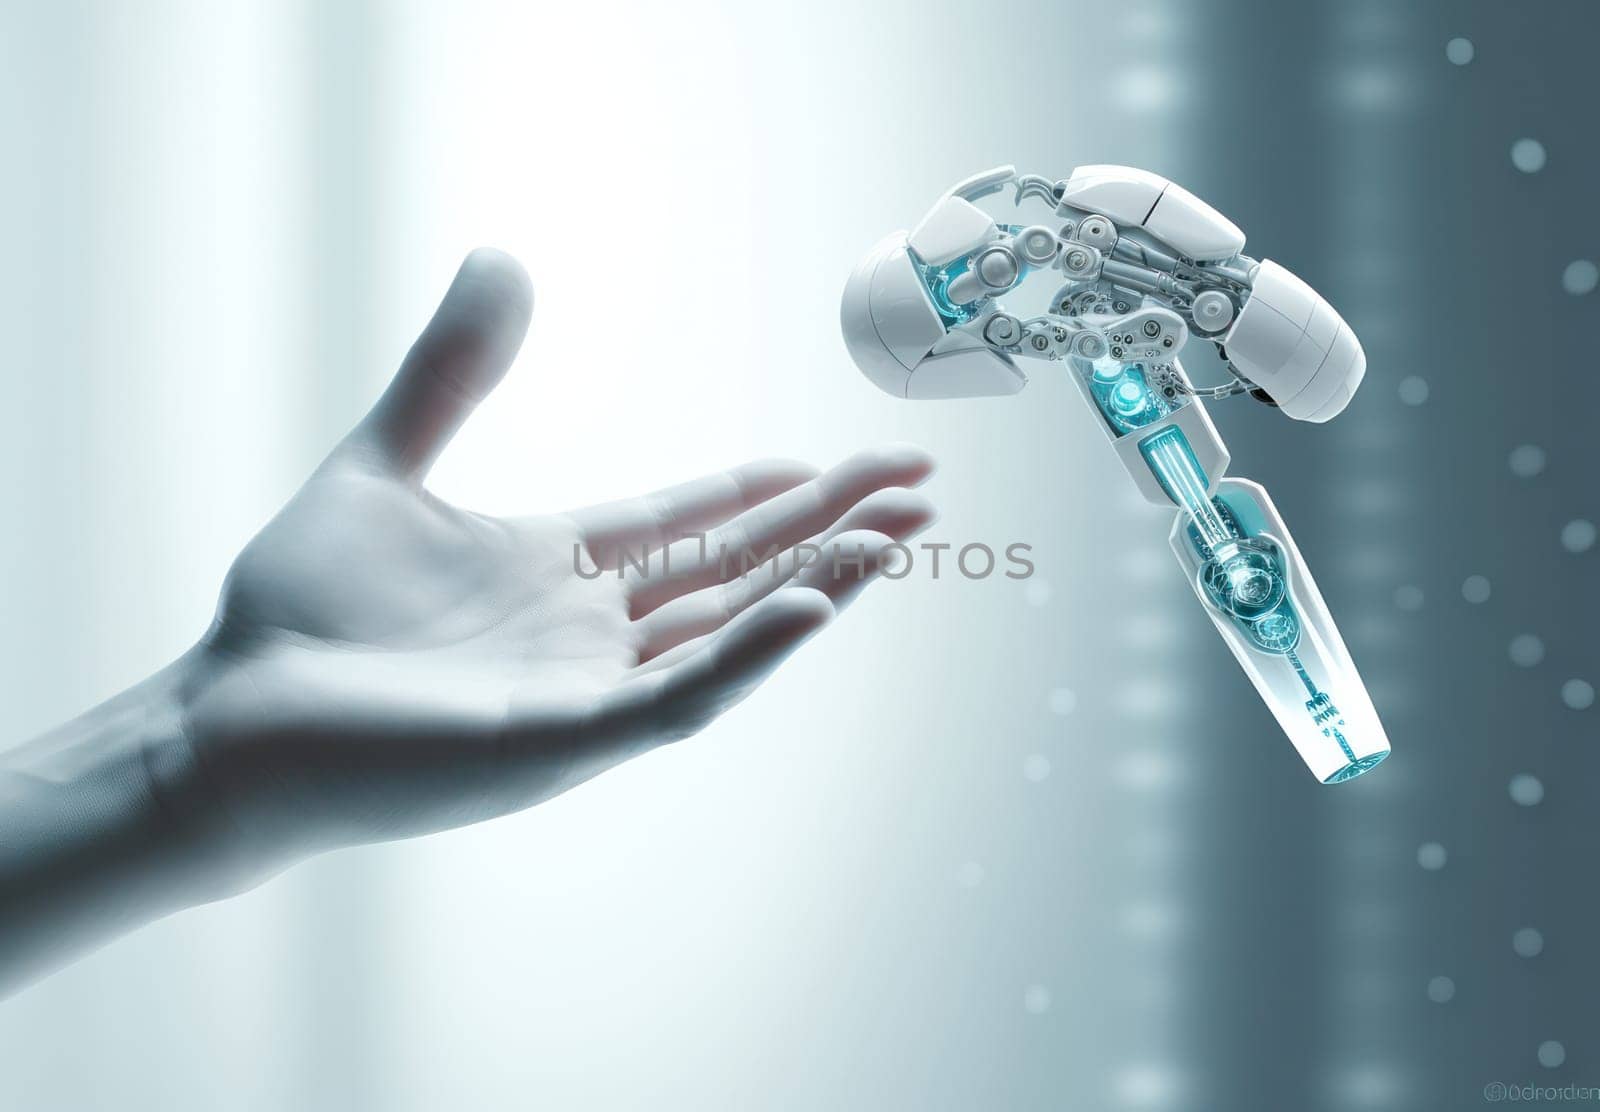 Future Handshake: An Intelligent Cyborg's Digital Connection in a Virtual Partnership by Vichizh